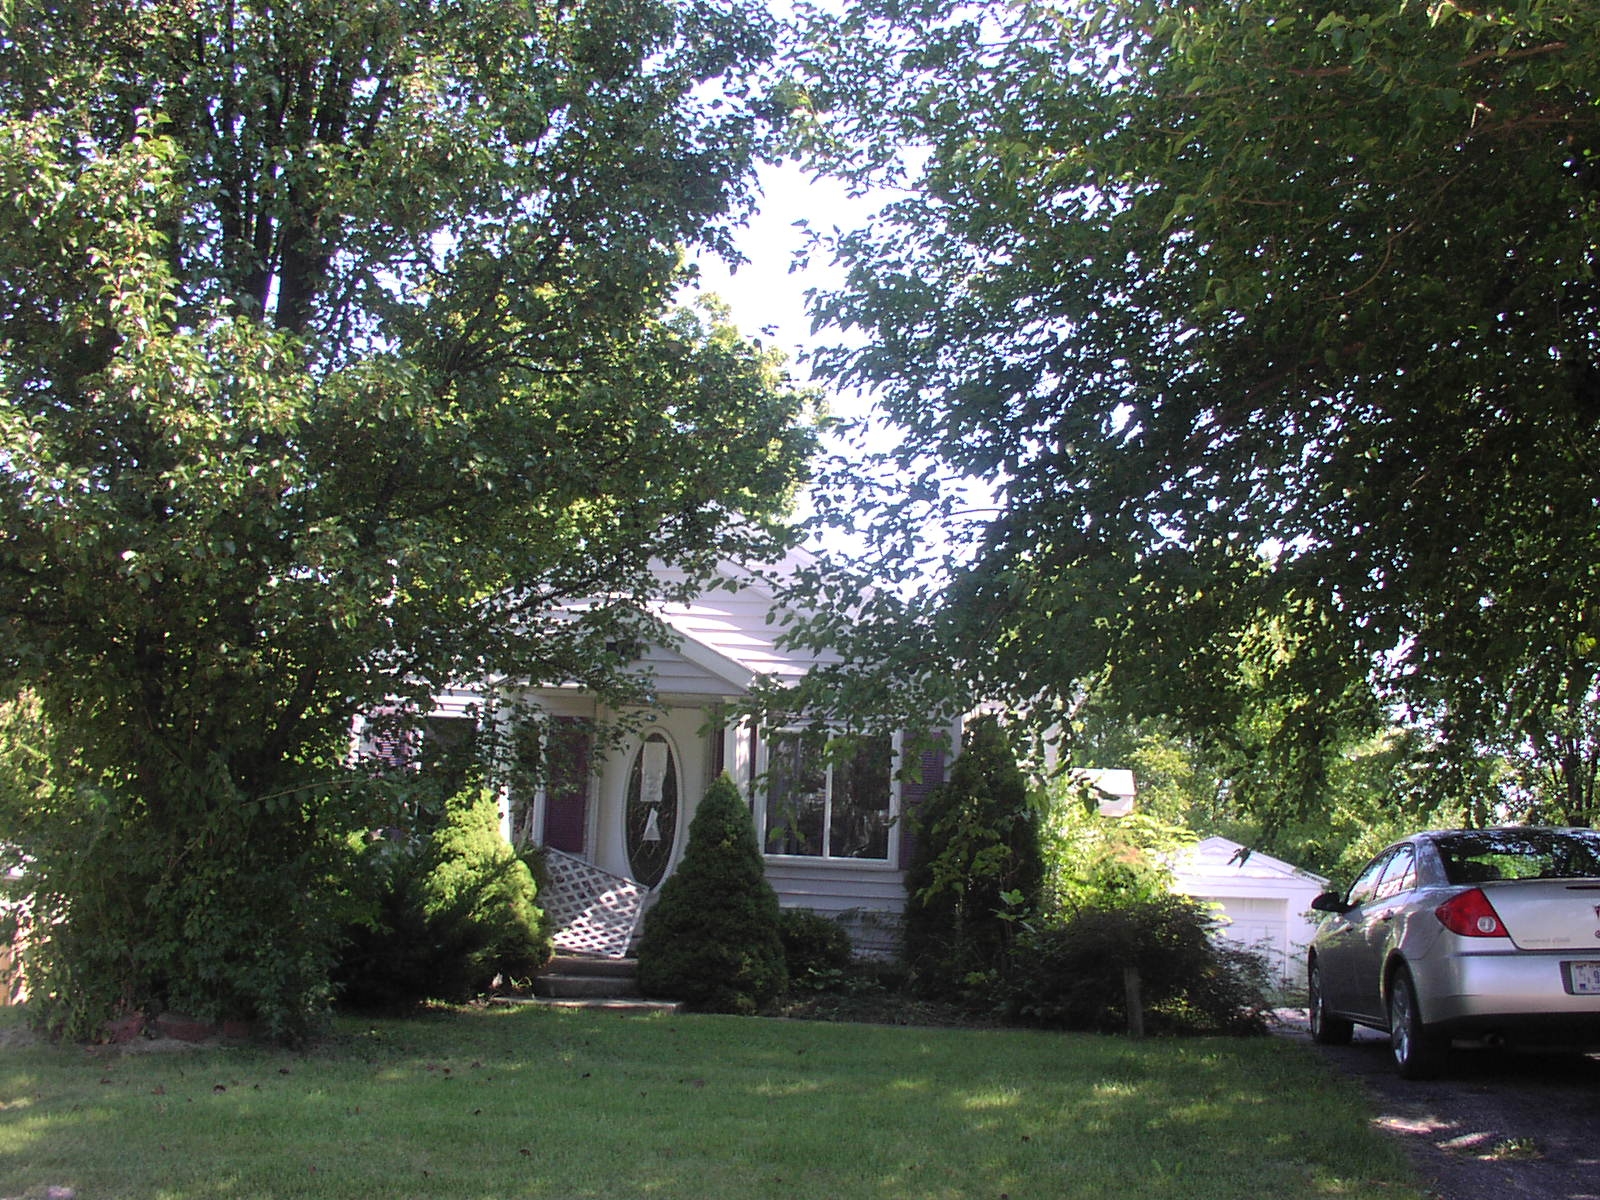  30 PEACH DRIVE, INDEPENDENCE, KY photo